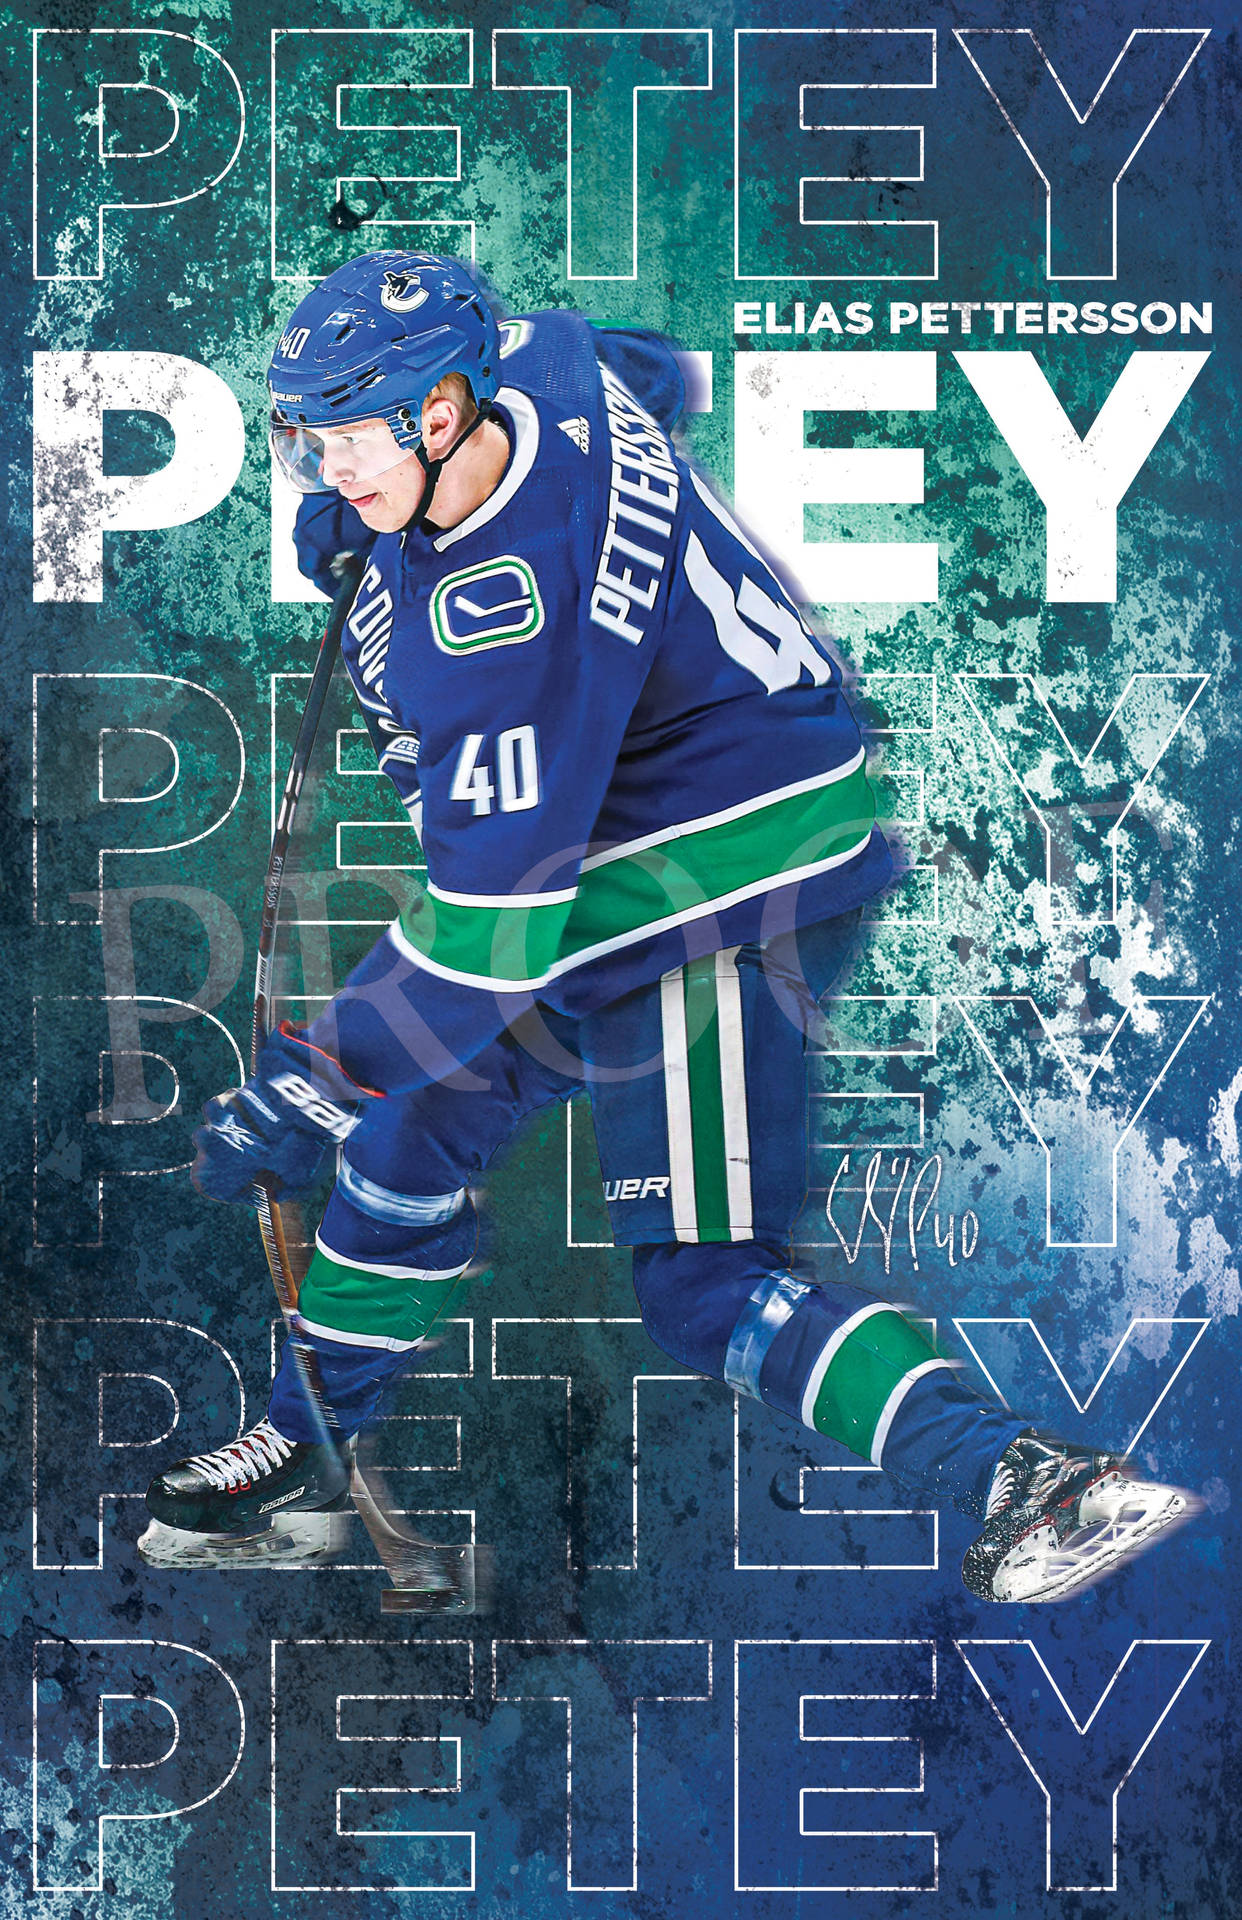 Canadian Nhl Player Elias Pettersson Digital Poster